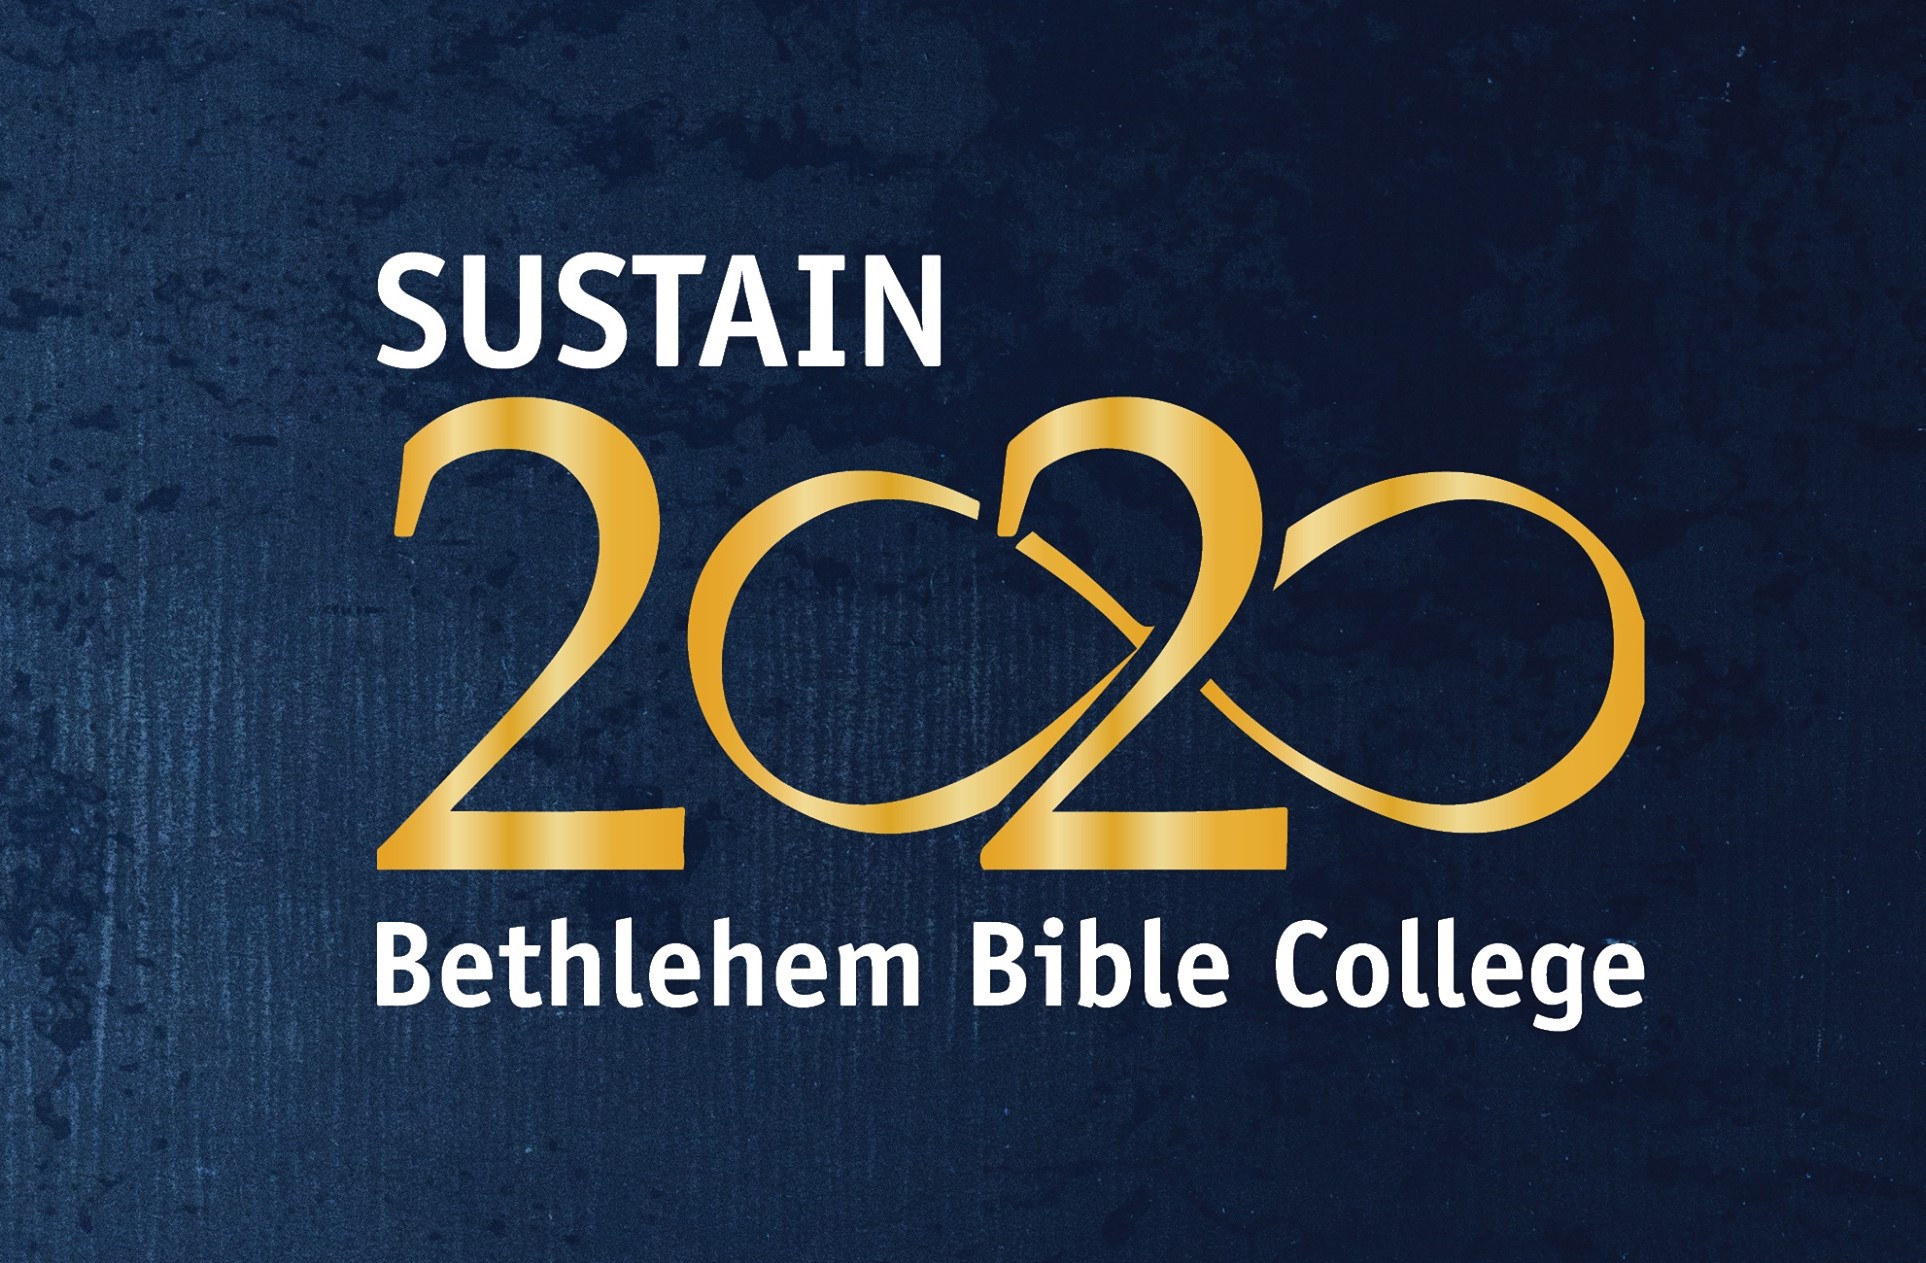 Starting a New Decade at Bethlehem Bible College